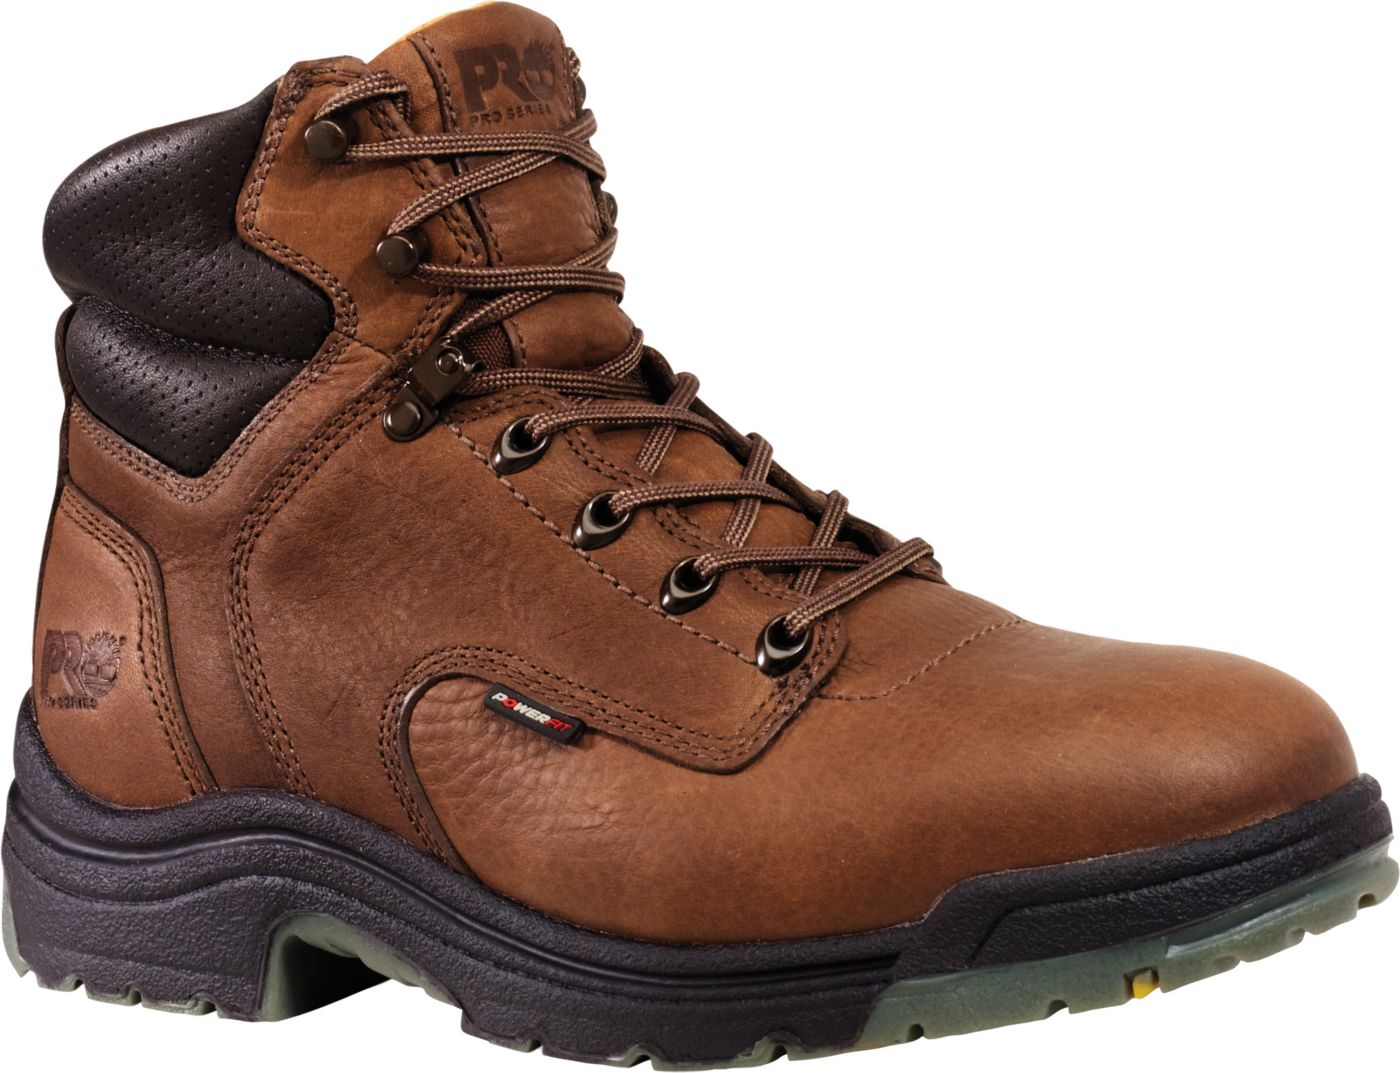 40 Best Images Jays Sporting Goods Boots - Bike Buying Guide | PRO TIPS by DICK'S Sporting Goods